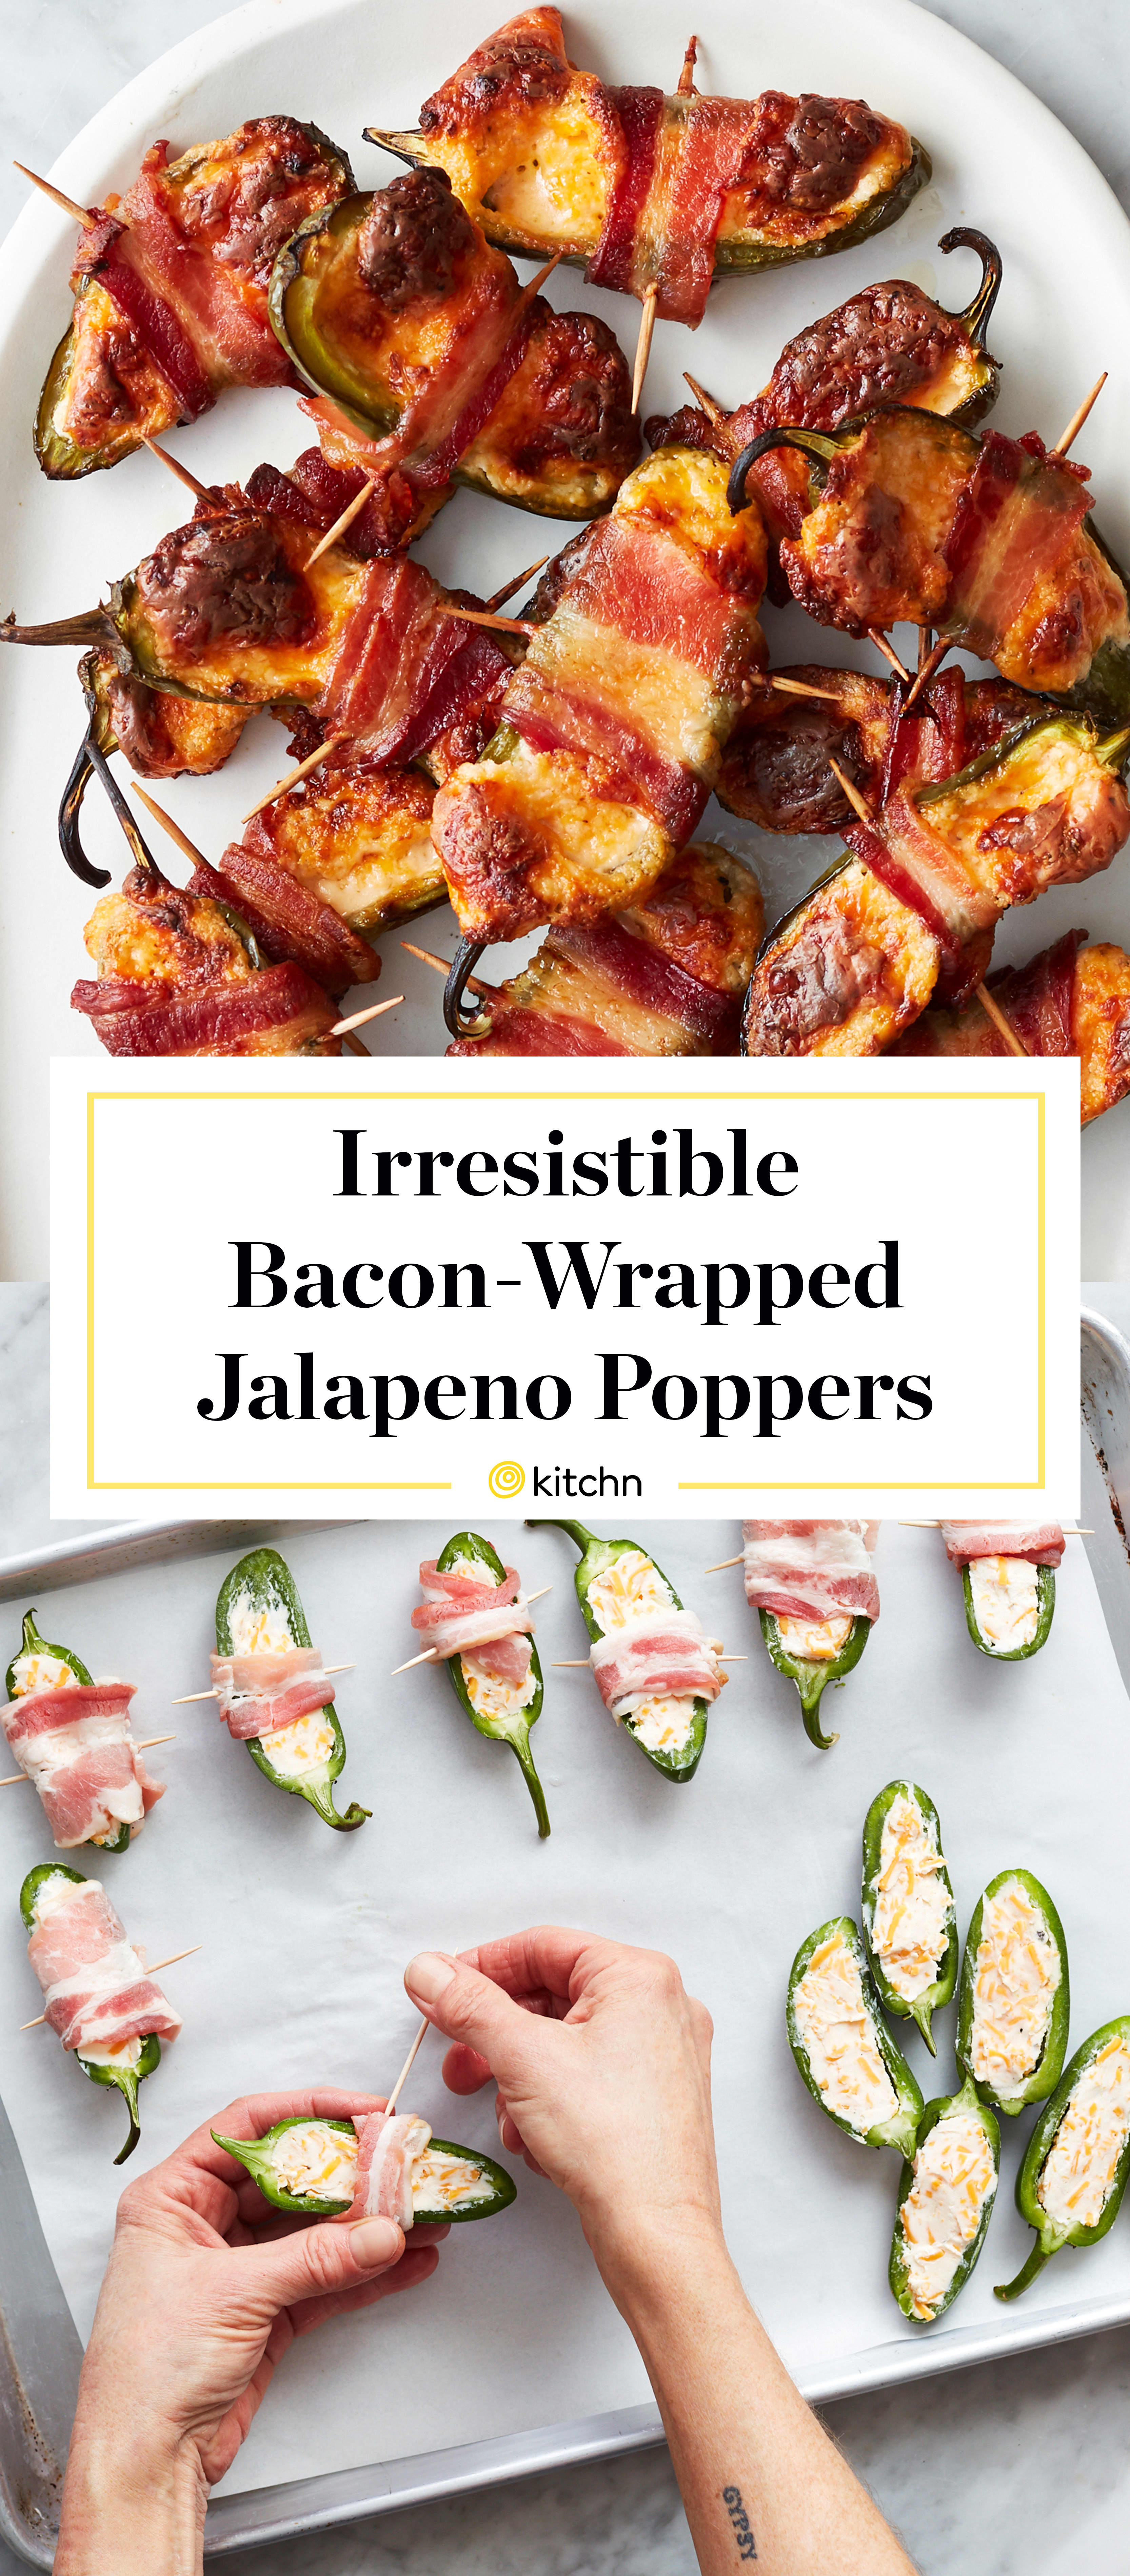 How To Make The Best Bacon Wrapped Jalapeno Poppers Kitchn,What Is Triple Sec Syrup